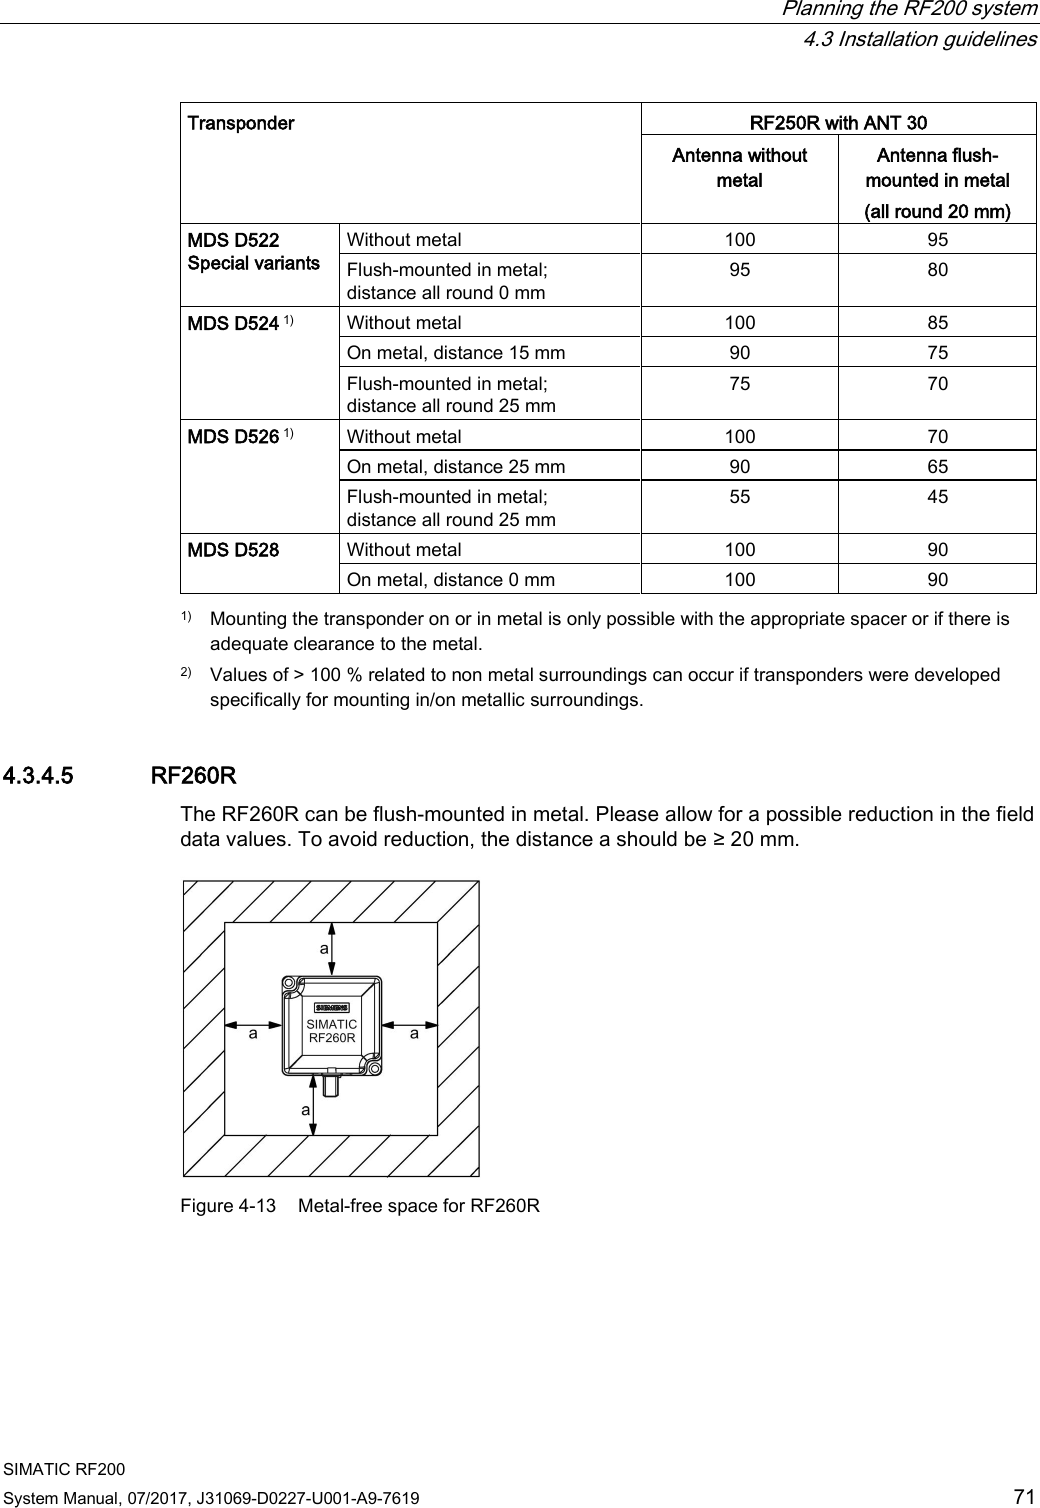  Planning the RF200 system  4.3 Installation guidelines SIMATIC RF200 System Manual, 07/2017, J31069-D0227-U001-A9-7619 71 Transponder RF250R with ANT 30 Antenna without metal Antenna flush-mounted in metal (all round 20 mm) MDS D522 Special variants Without metal  100 95 Flush-mounted in metal; distance all round 0 mm 95 80 MDS D524 1) Without metal  100 85 On metal, distance 15 mm  90 75 Flush-mounted in metal; distance all round 25 mm  75 70 MDS D526 1) Without metal  100 70 On metal, distance 25 mm  90 65 Flush-mounted in metal; distance all round 25 mm  55 45 MDS D528 Without metal  100 90 On metal, distance 0 mm  100 90  1)  Mounting the transponder on or in metal is only possible with the appropriate spacer or if there is adequate clearance to the metal. 2) Values of &gt; 100 % related to non metal surroundings can occur if transponders were developed specifically for mounting in/on metallic surroundings. 4.3.4.5 RF260R The RF260R can be flush-mounted in metal. Please allow for a possible reduction in the field data values. To avoid reduction, the distance a should be ≥ 20 mm.  Figure 4-13 Metal-free space for RF260R  